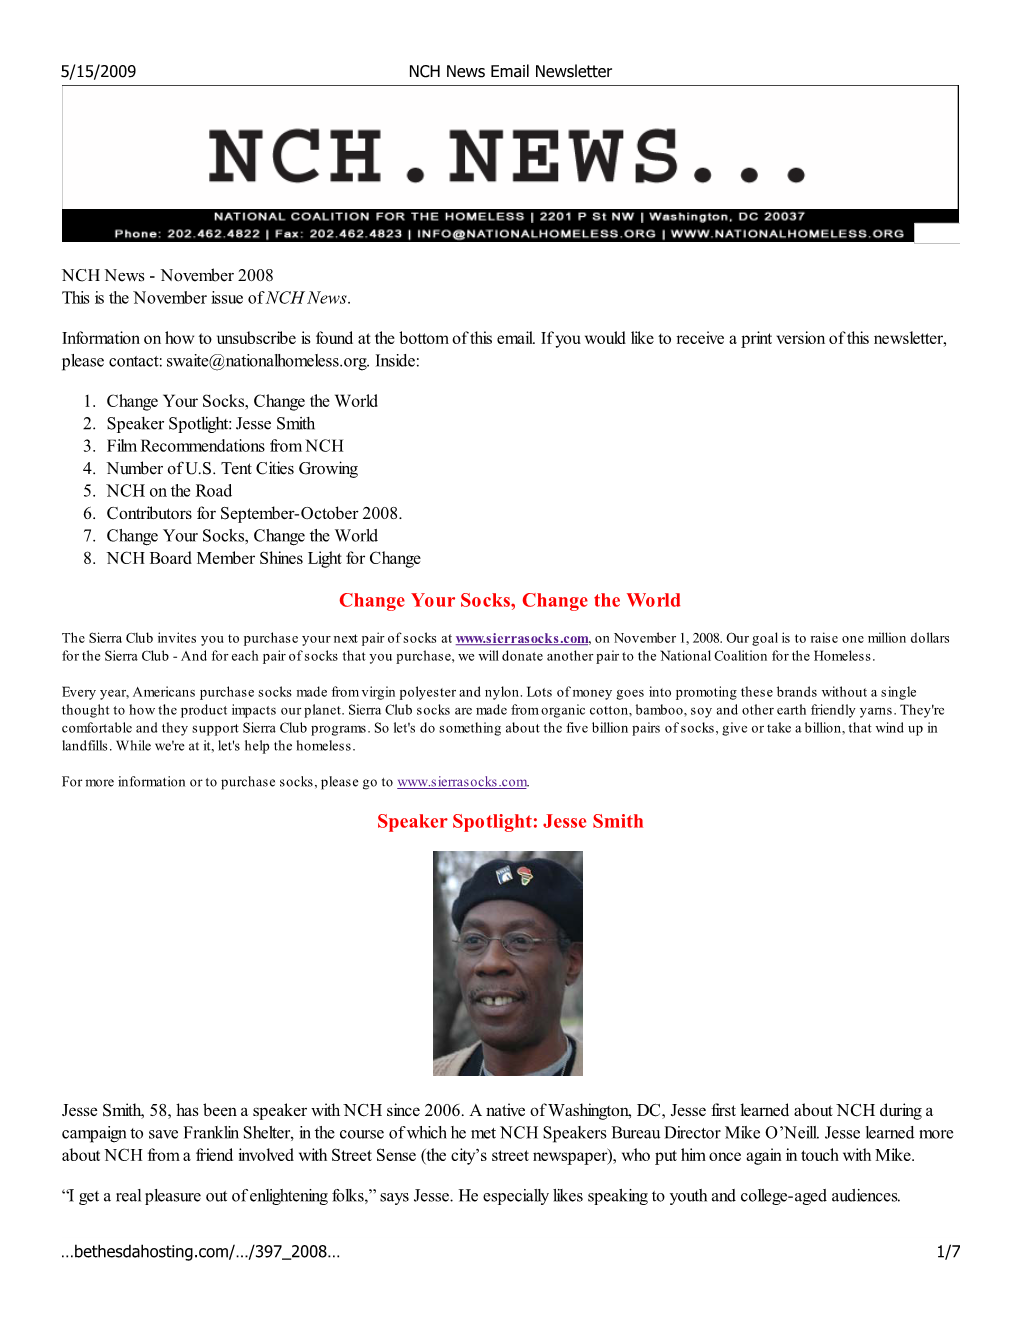 NCH News Email Newsletter